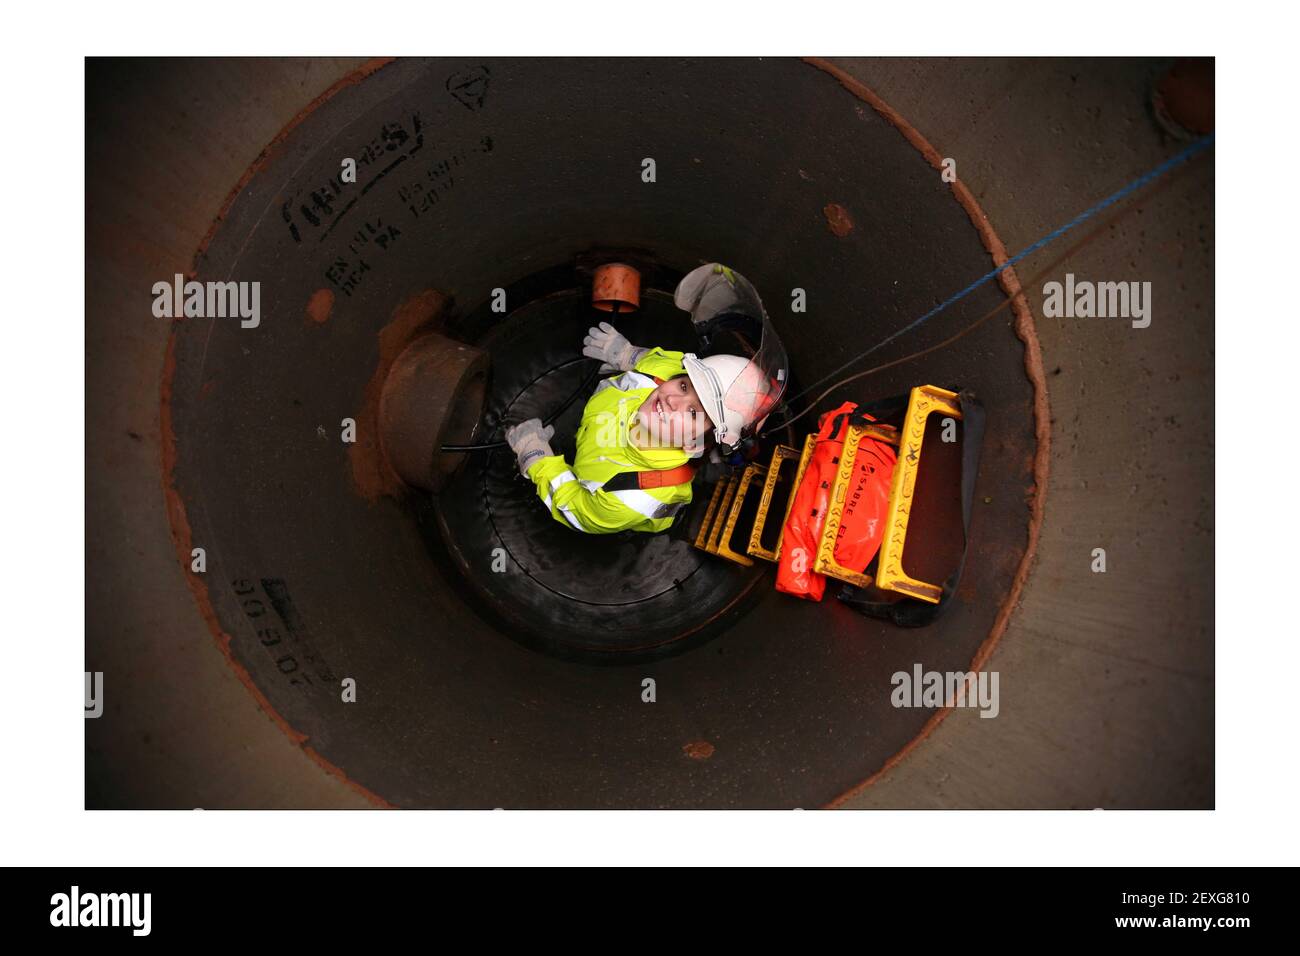 Rebecca Armstrong investigates H2O networks installing of Fibre optic cables useing the sewer network, with field engeneer H2O's Lee Roberts.photograph by David Sandison The Independent Stock Photo